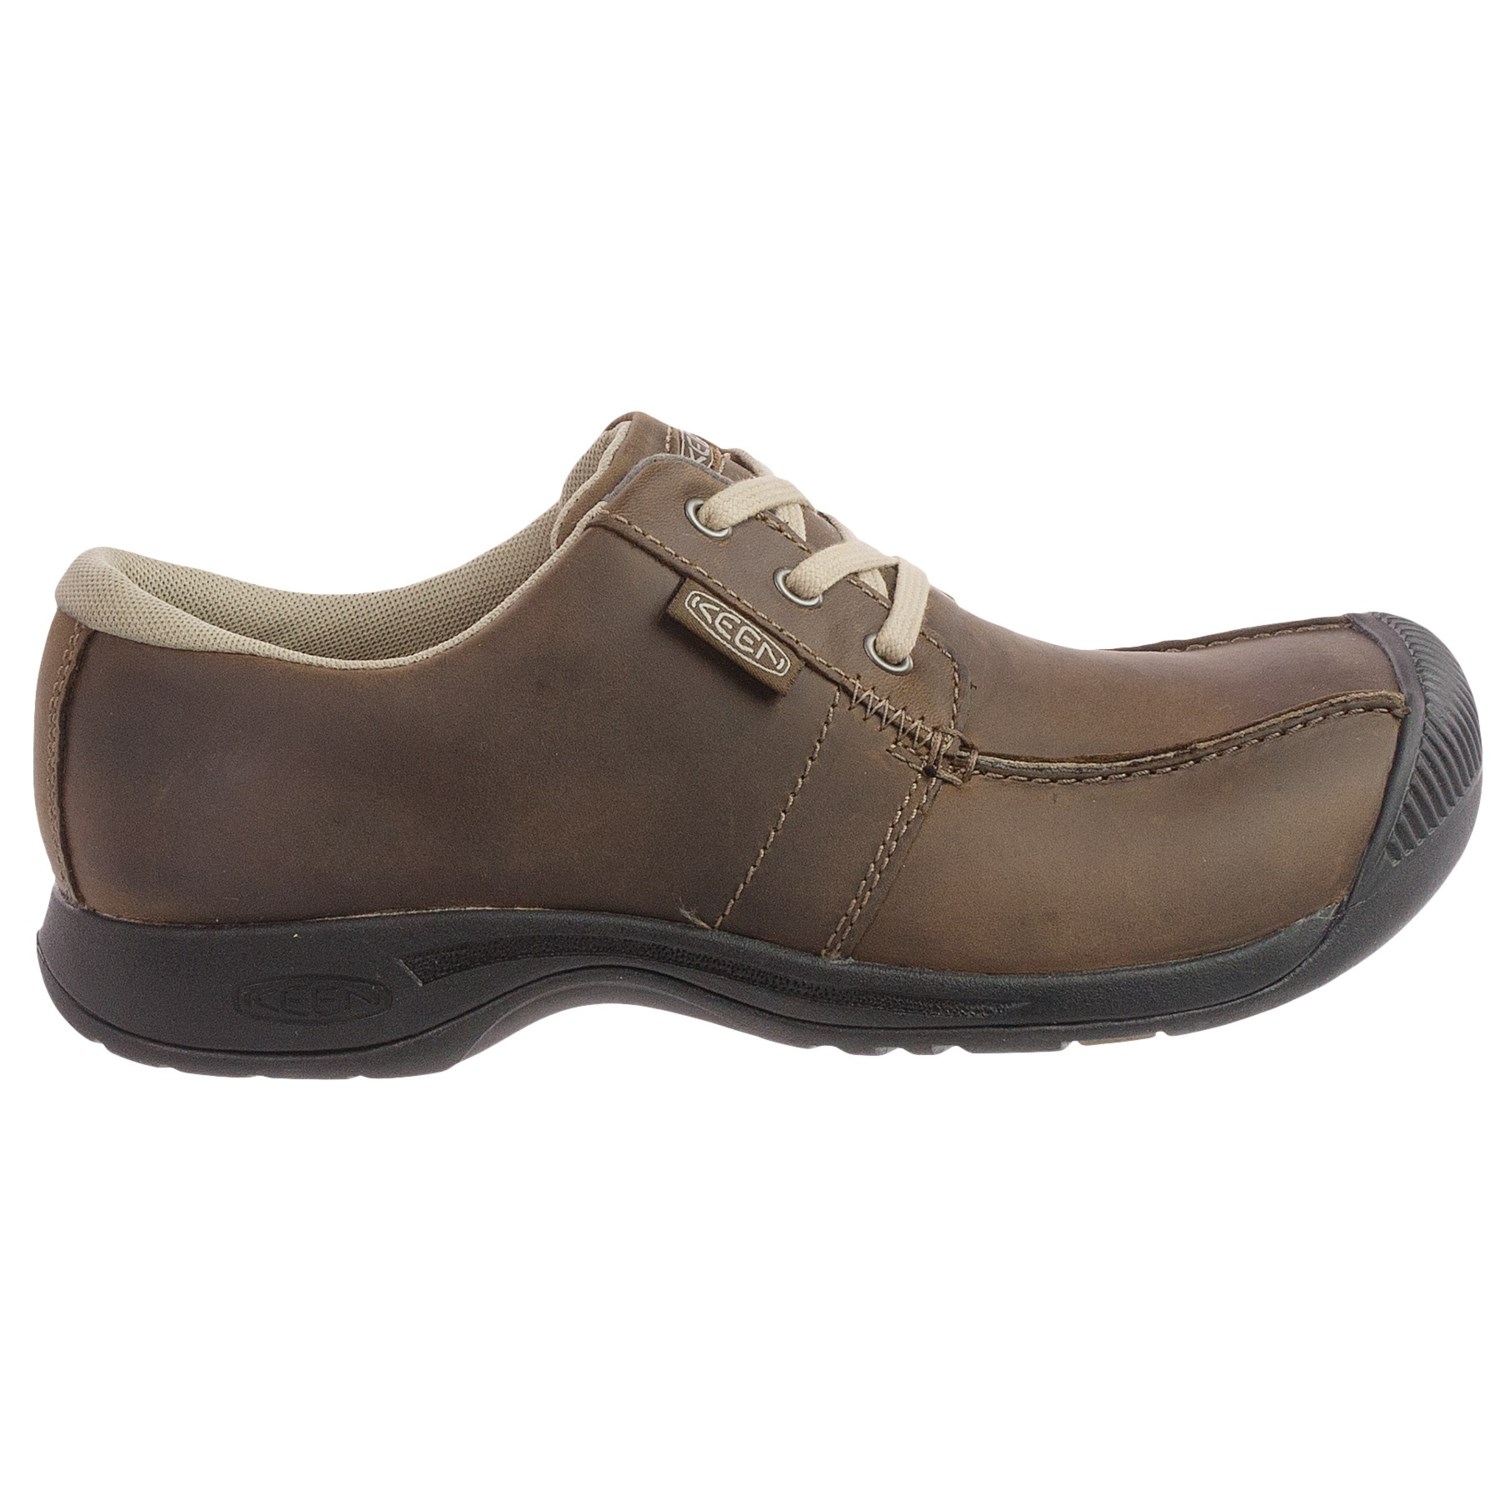 Keen Reisen Low Oxford Shoes (For Men) 111NH - Save 41%